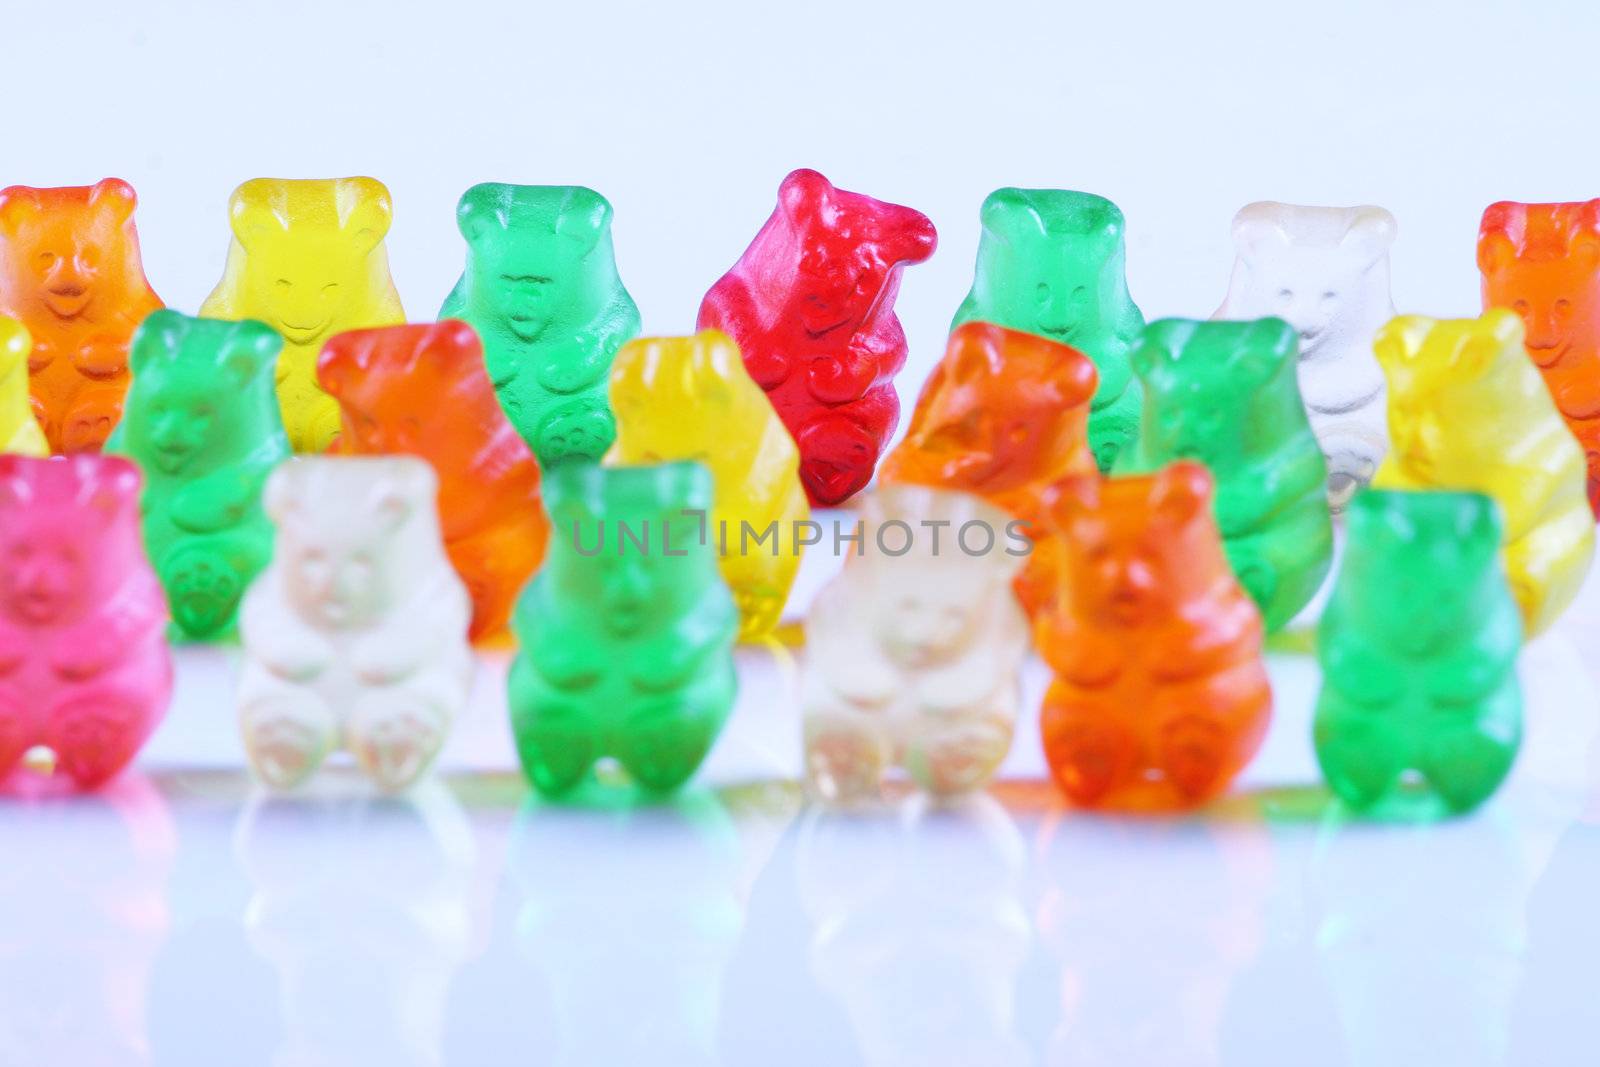 Colorful gummy bears lined up in rows, with the sole red bear being main focus. Isolated on white.;